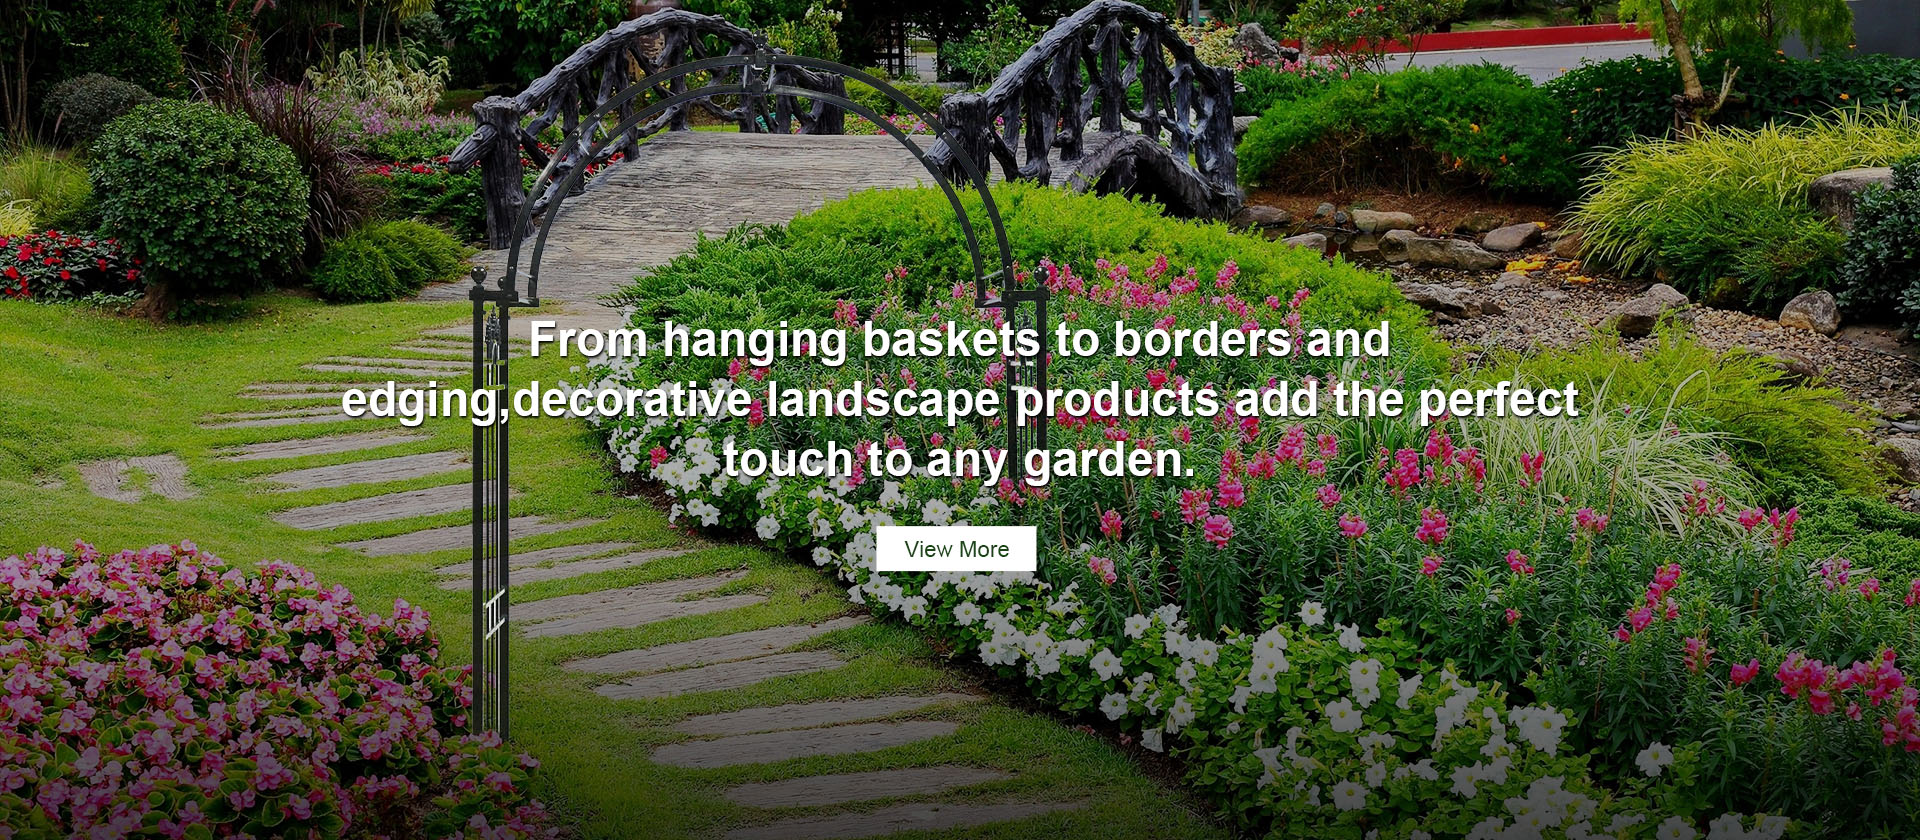 From hanging baskets to borders and edging,decorative landscape products add the perfect touch to any garden.